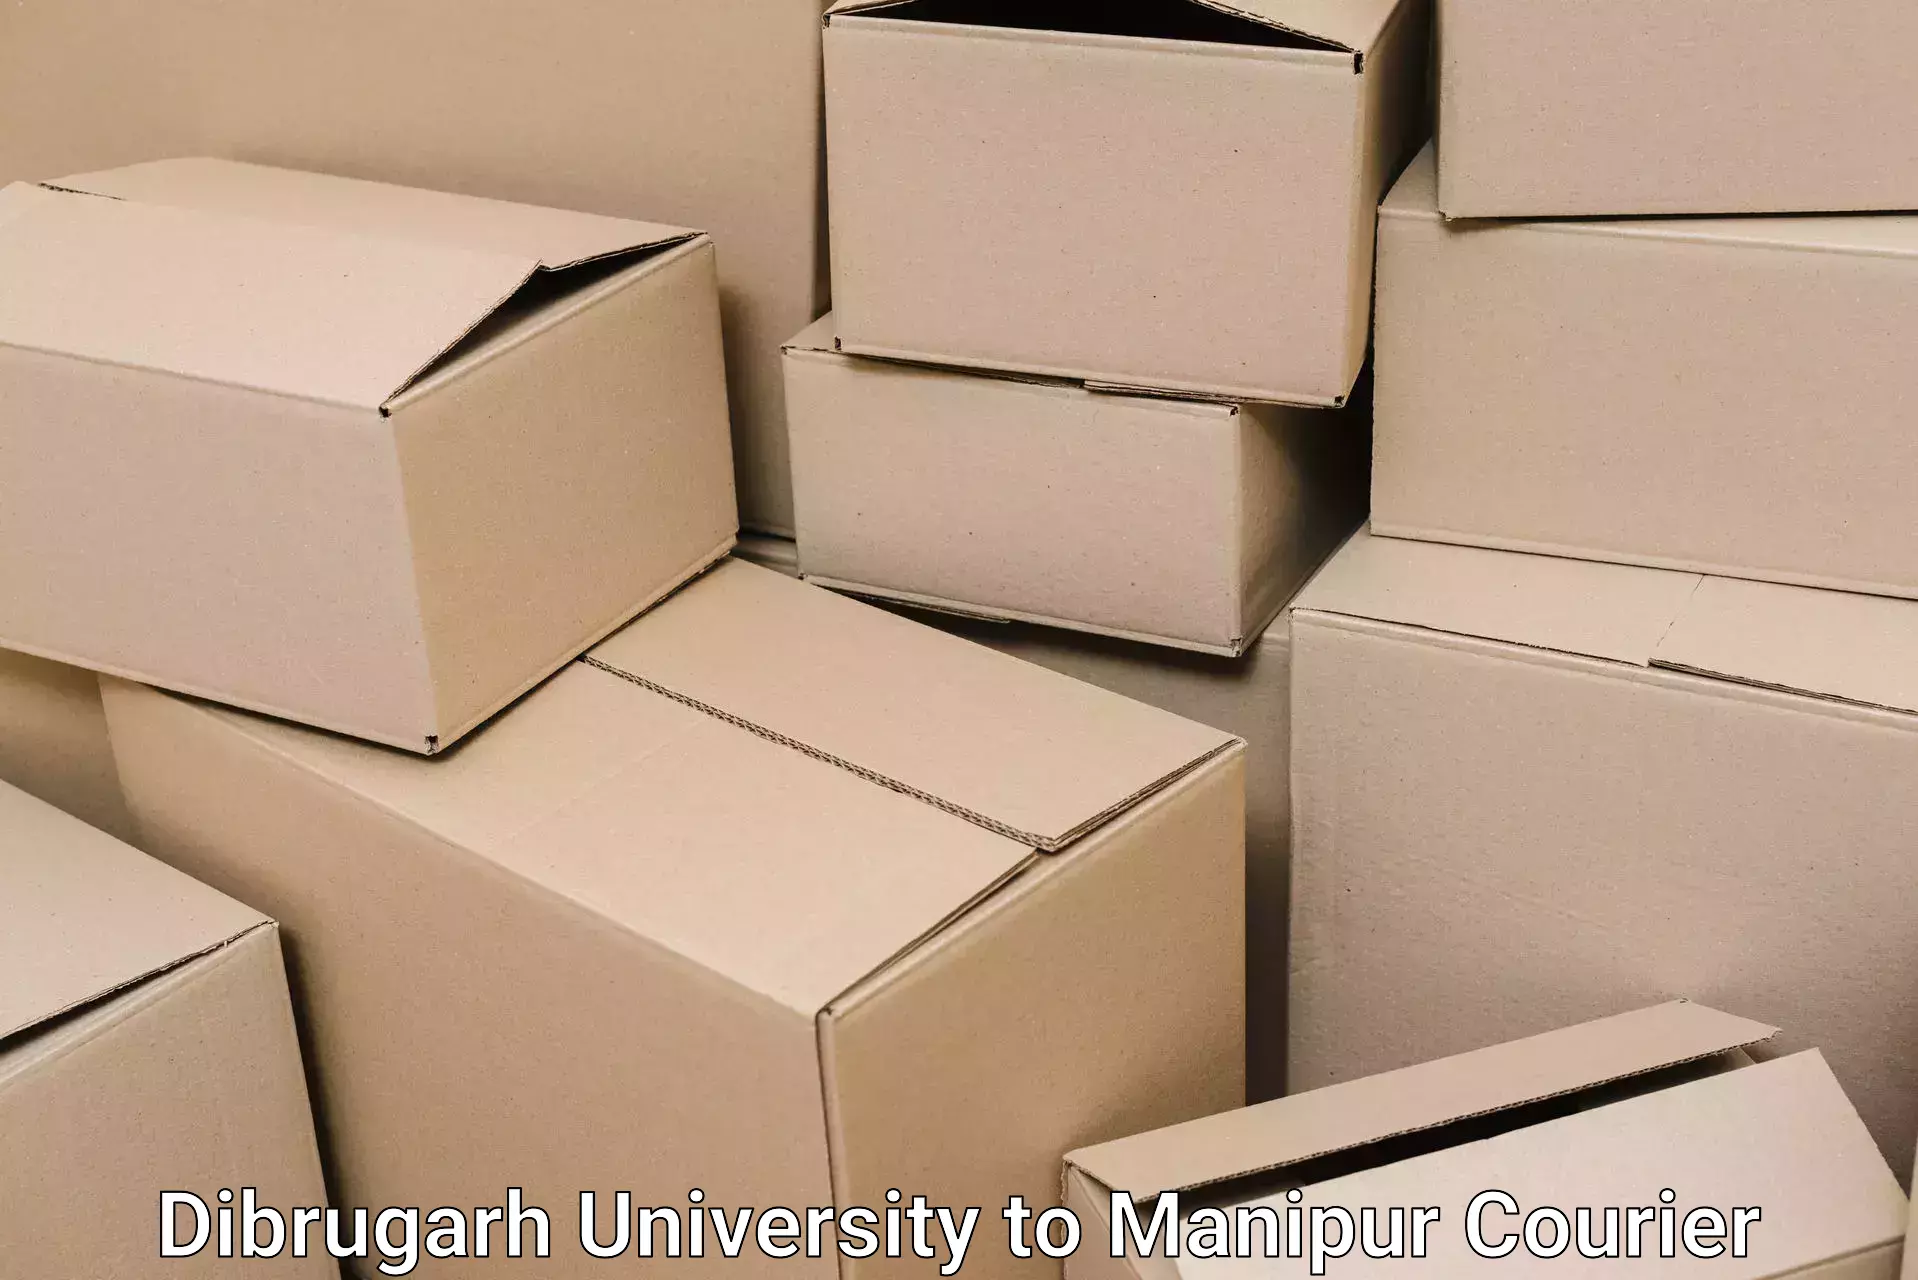 Professional movers and packers Dibrugarh University to Thoubal